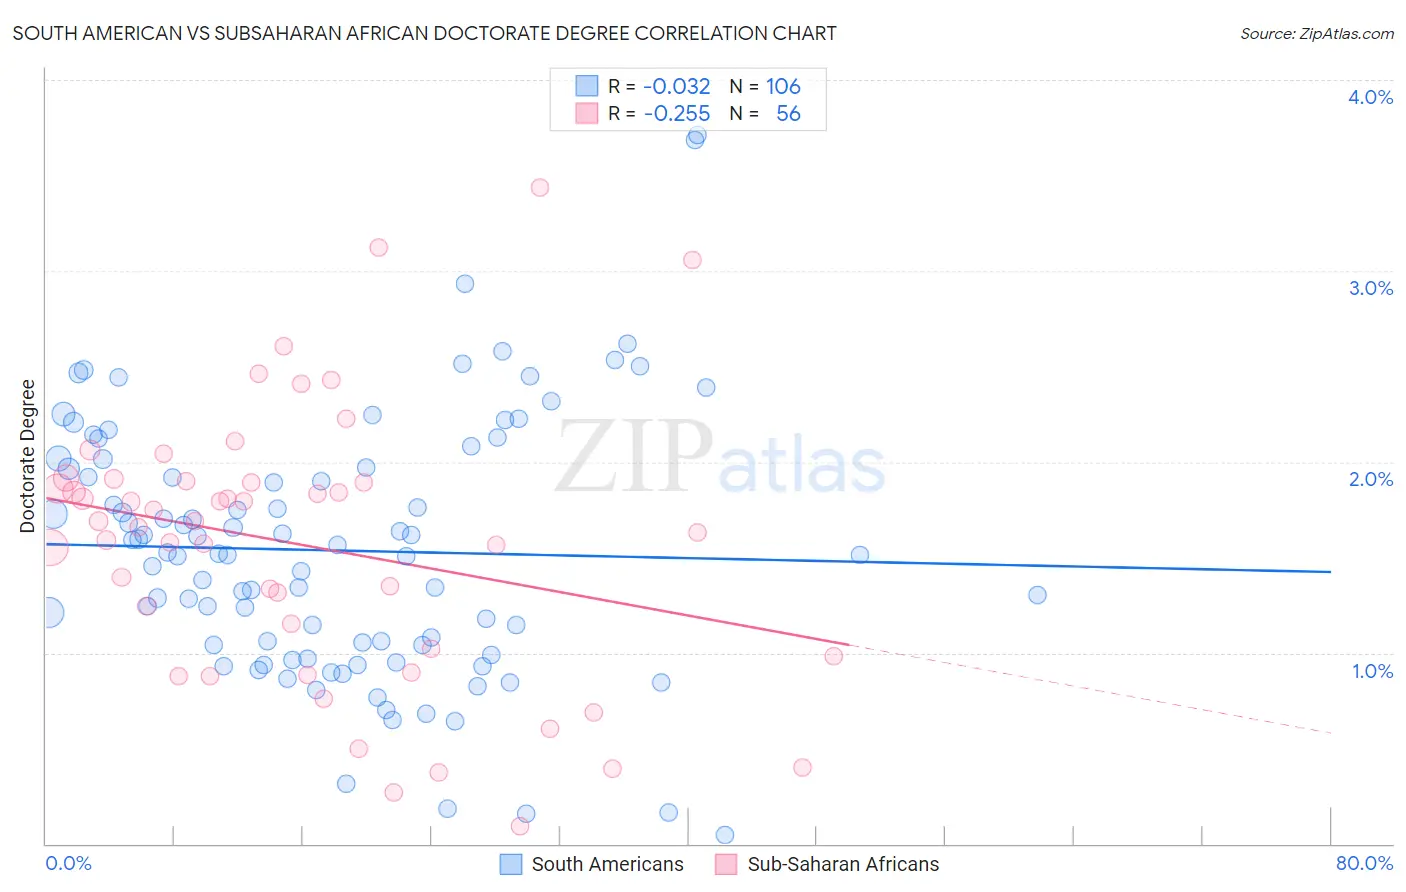 South American vs Subsaharan African Doctorate Degree